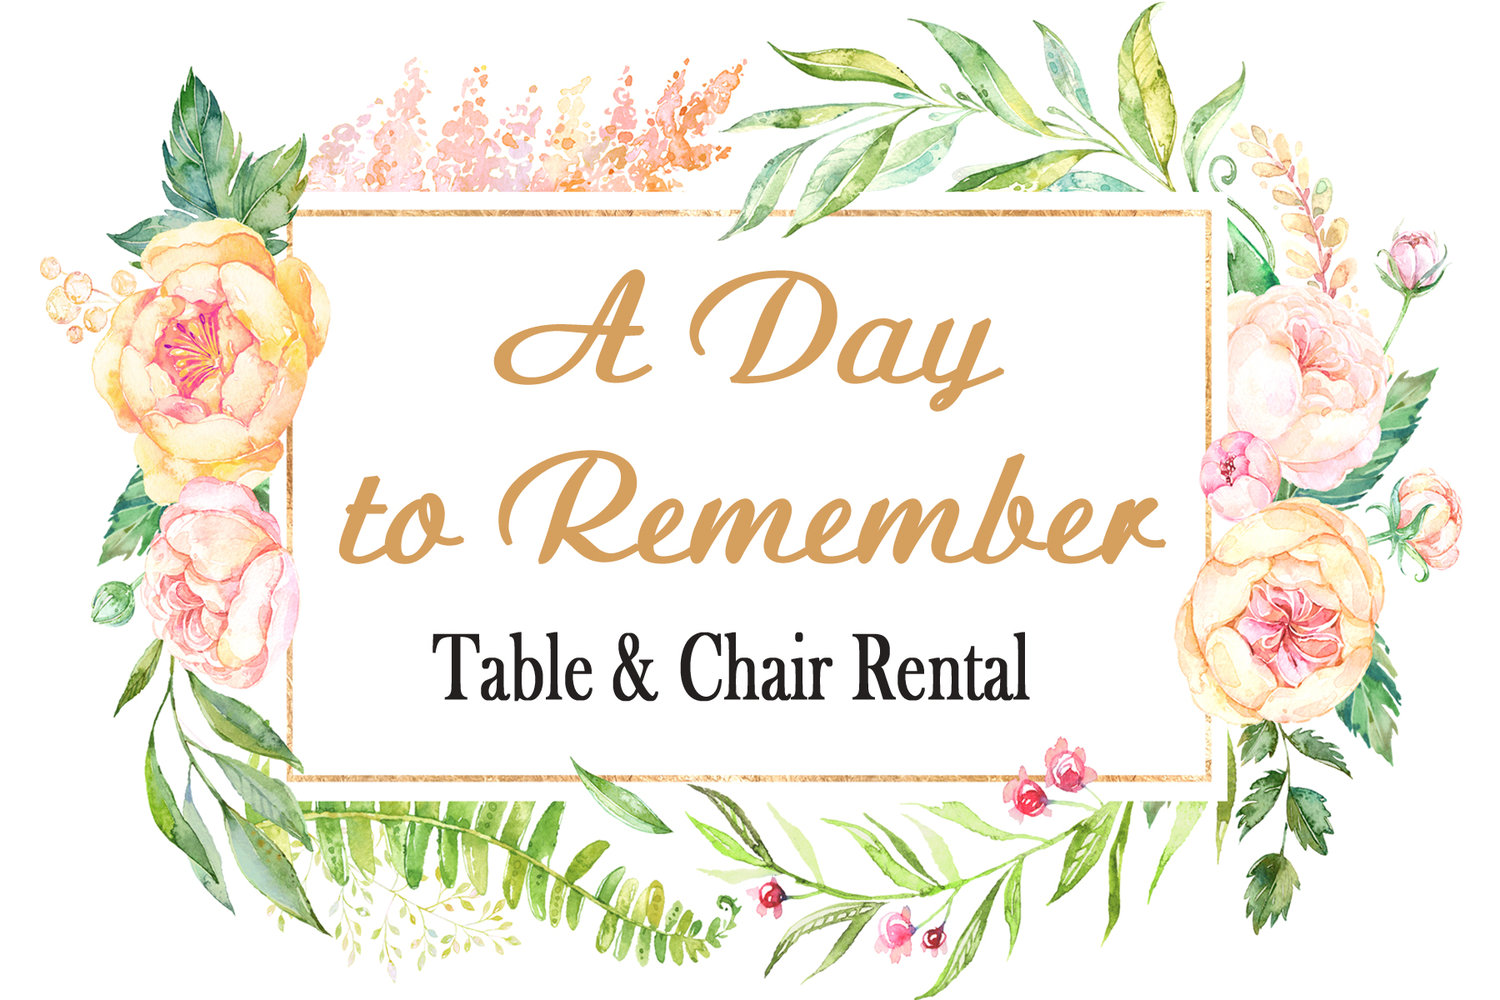 A Day To Remember Rentals